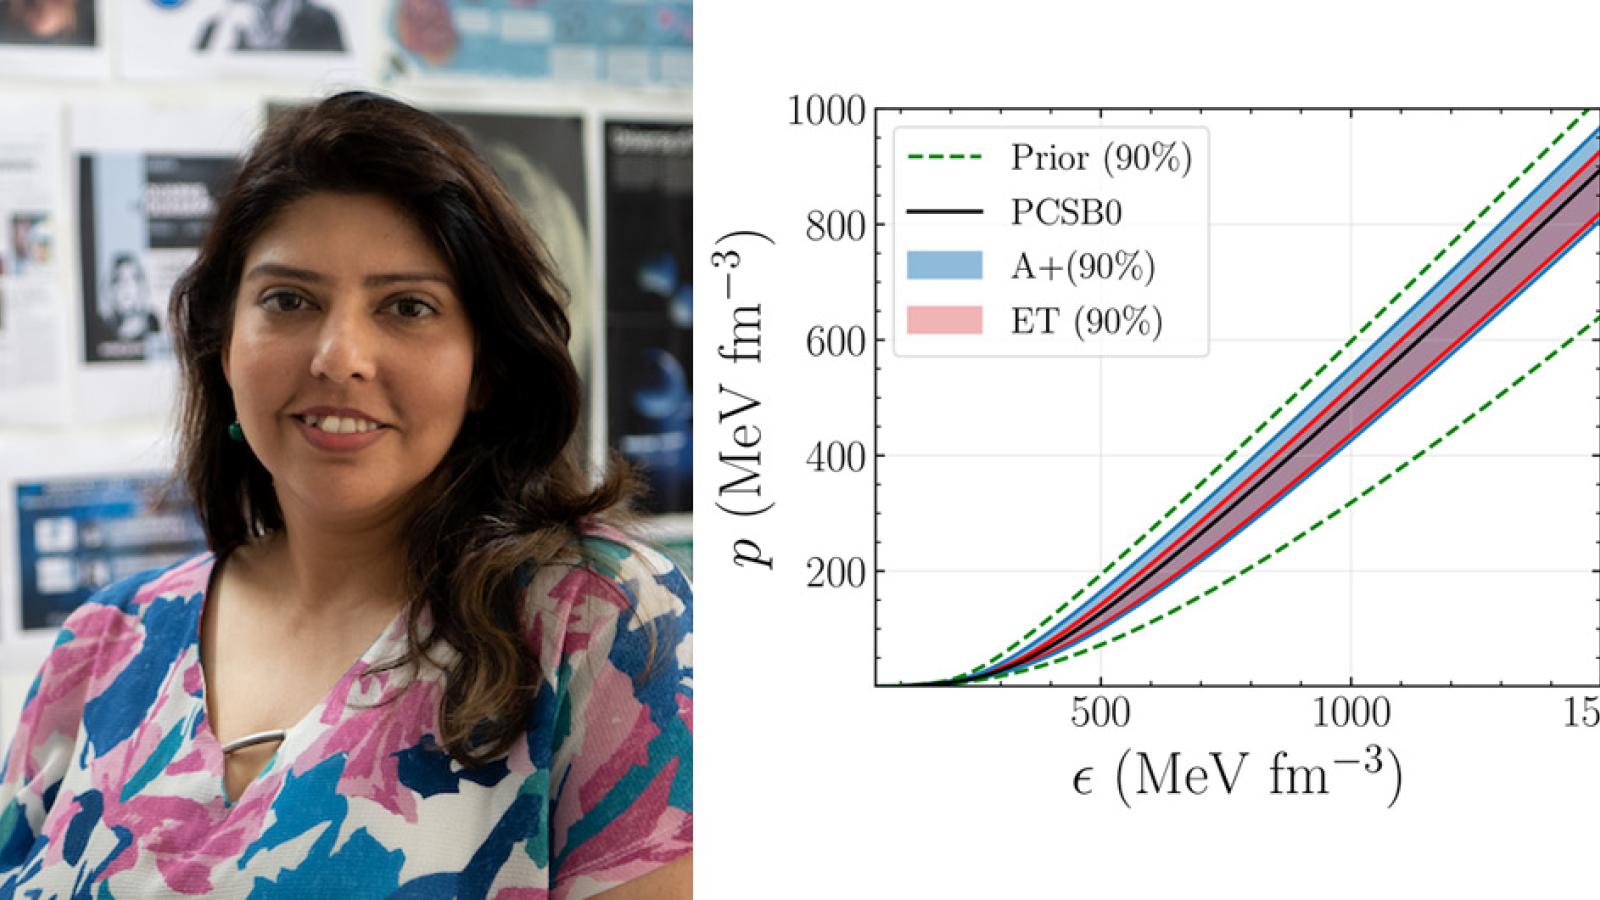 Debarati Chatterjee, and neutron star equation of state